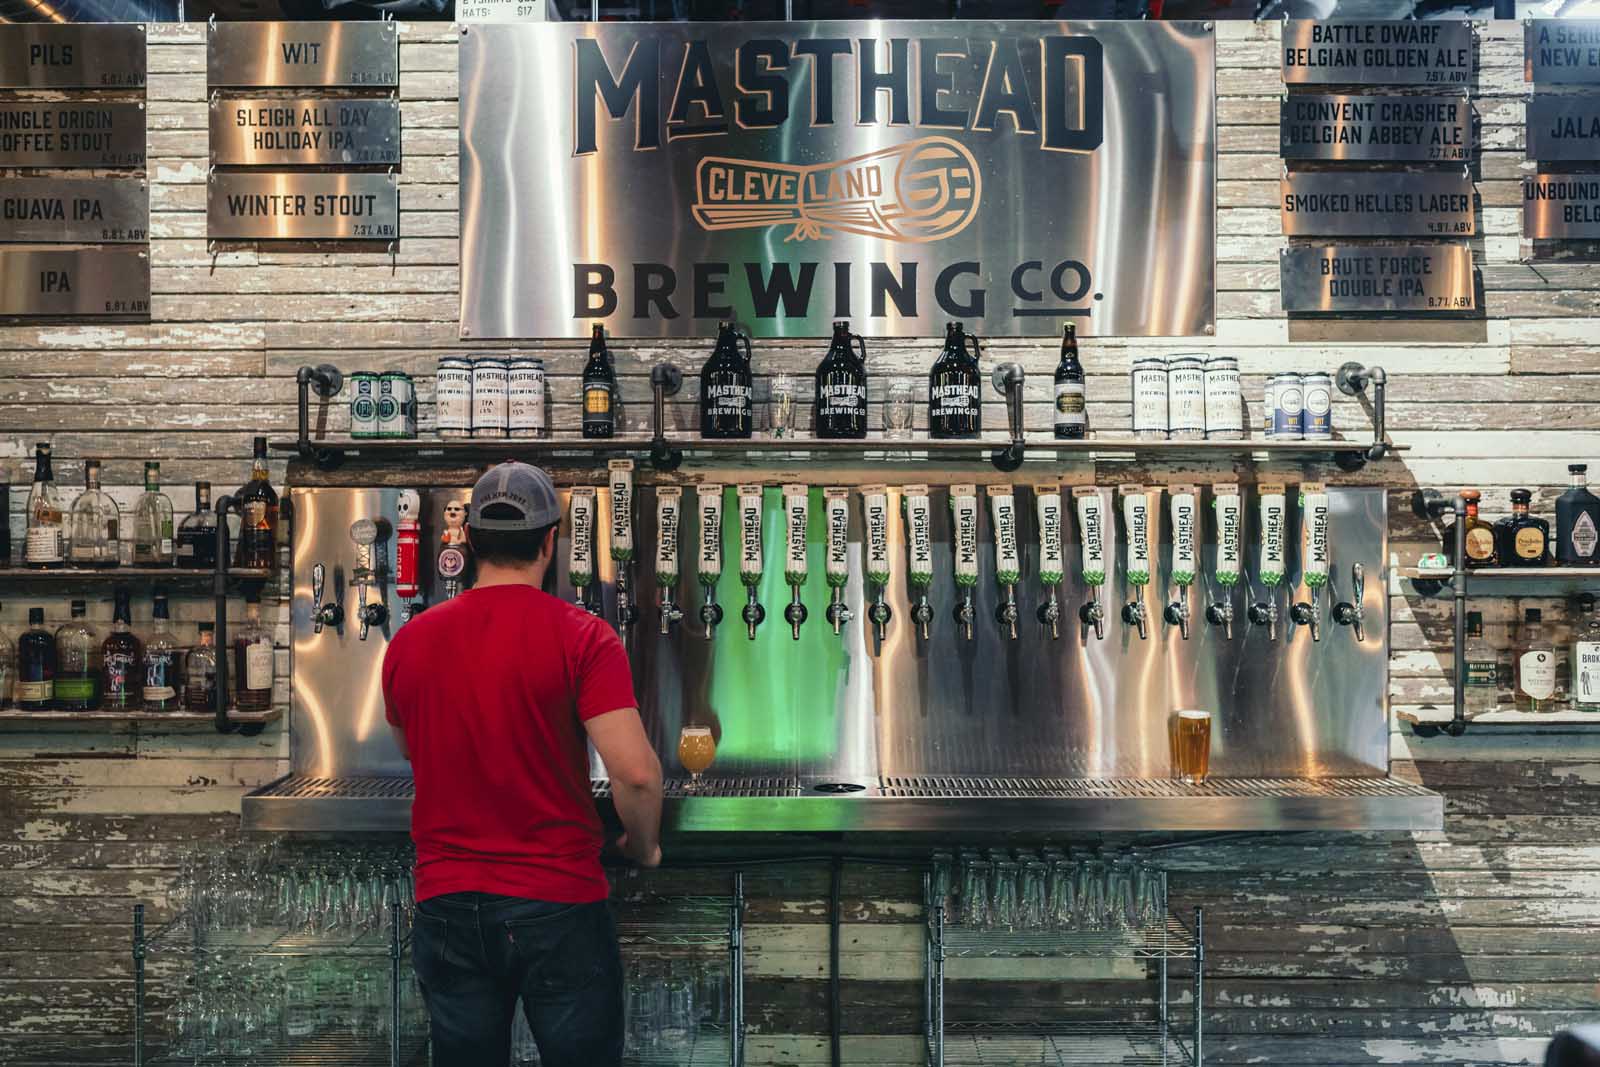 Masthead Brewery in Downtown Cleveland Ohio